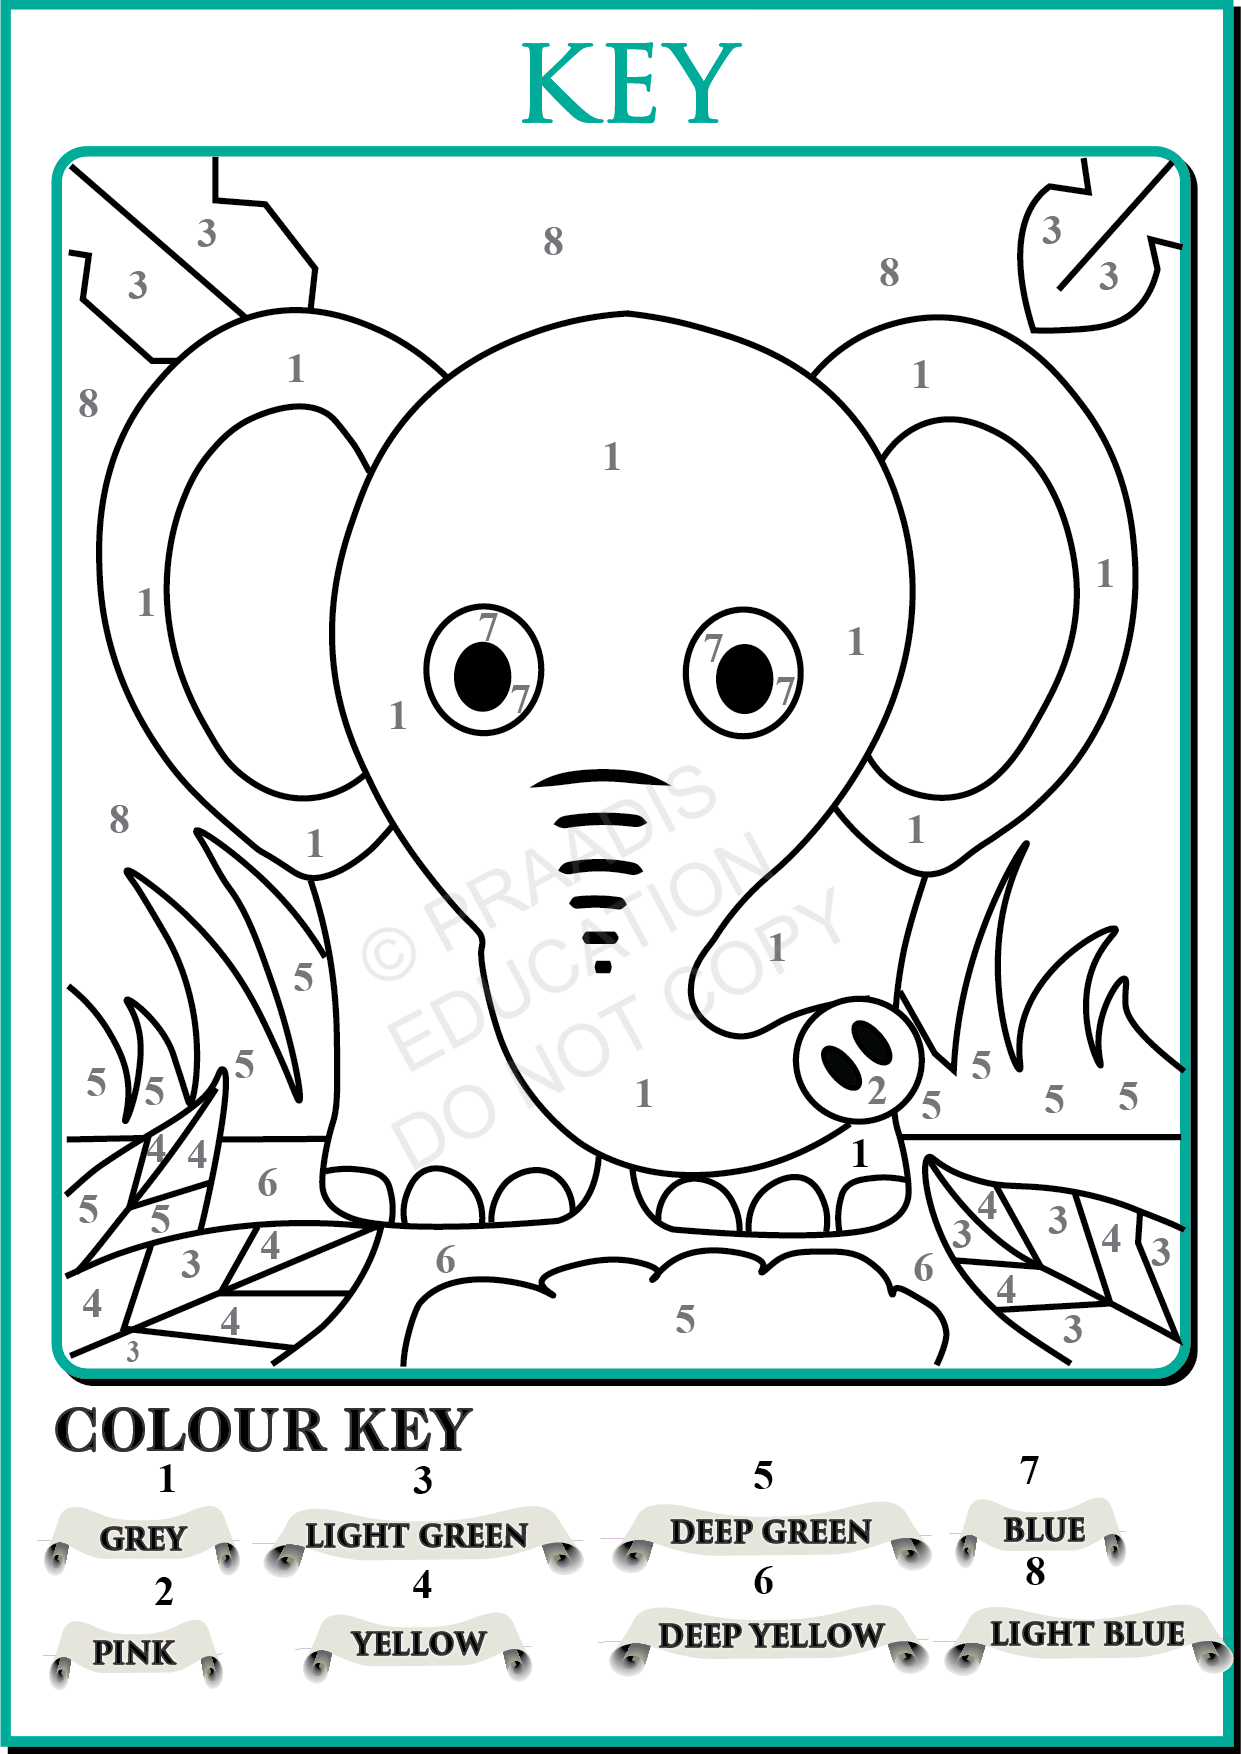 Dot to Dot and Coloring Book for Kids Ages 4-8: Connect the Dots and Animal  Coloring Book for Kids Ages 4-6 3-8 3-5 6-8 - Dot to Dot Colouring Books f  (Paperback)